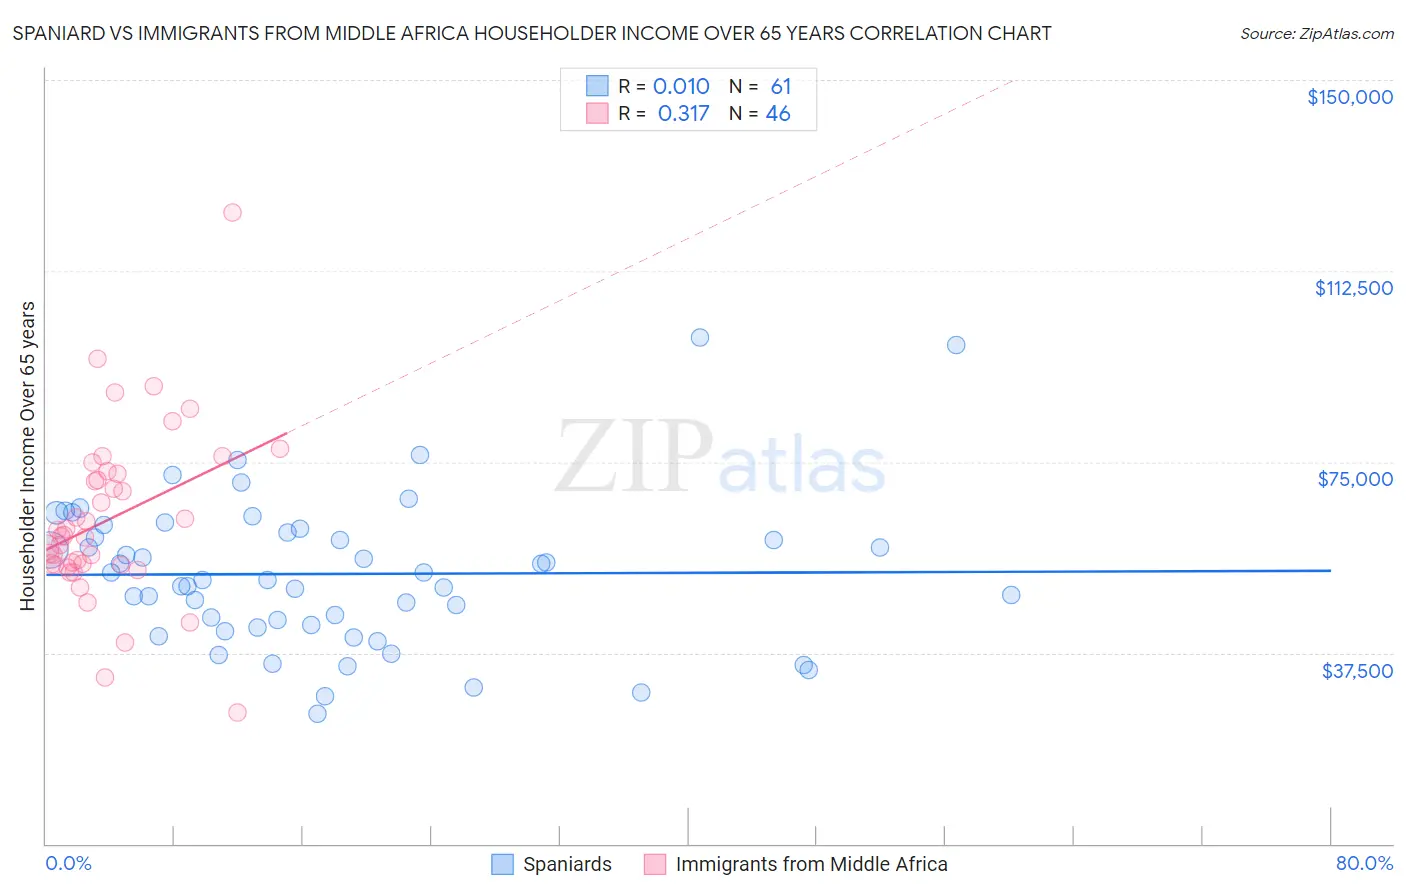 Spaniard vs Immigrants from Middle Africa Householder Income Over 65 years